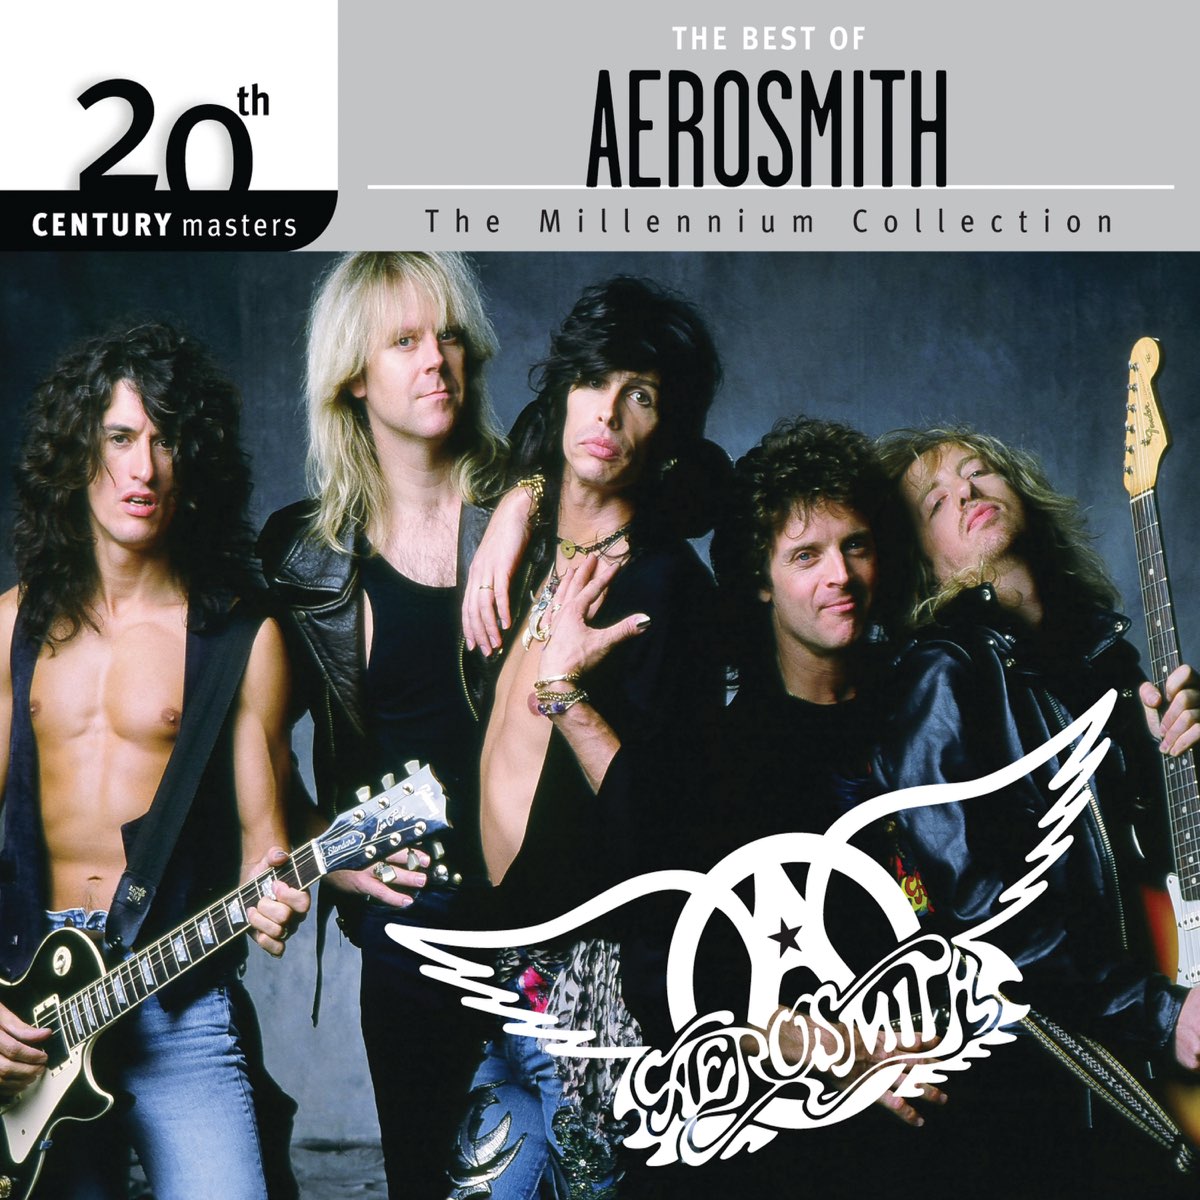 20th Century Masters - The Millennium Collection: The Best of Aerosmith by  Aerosmith on Apple Music